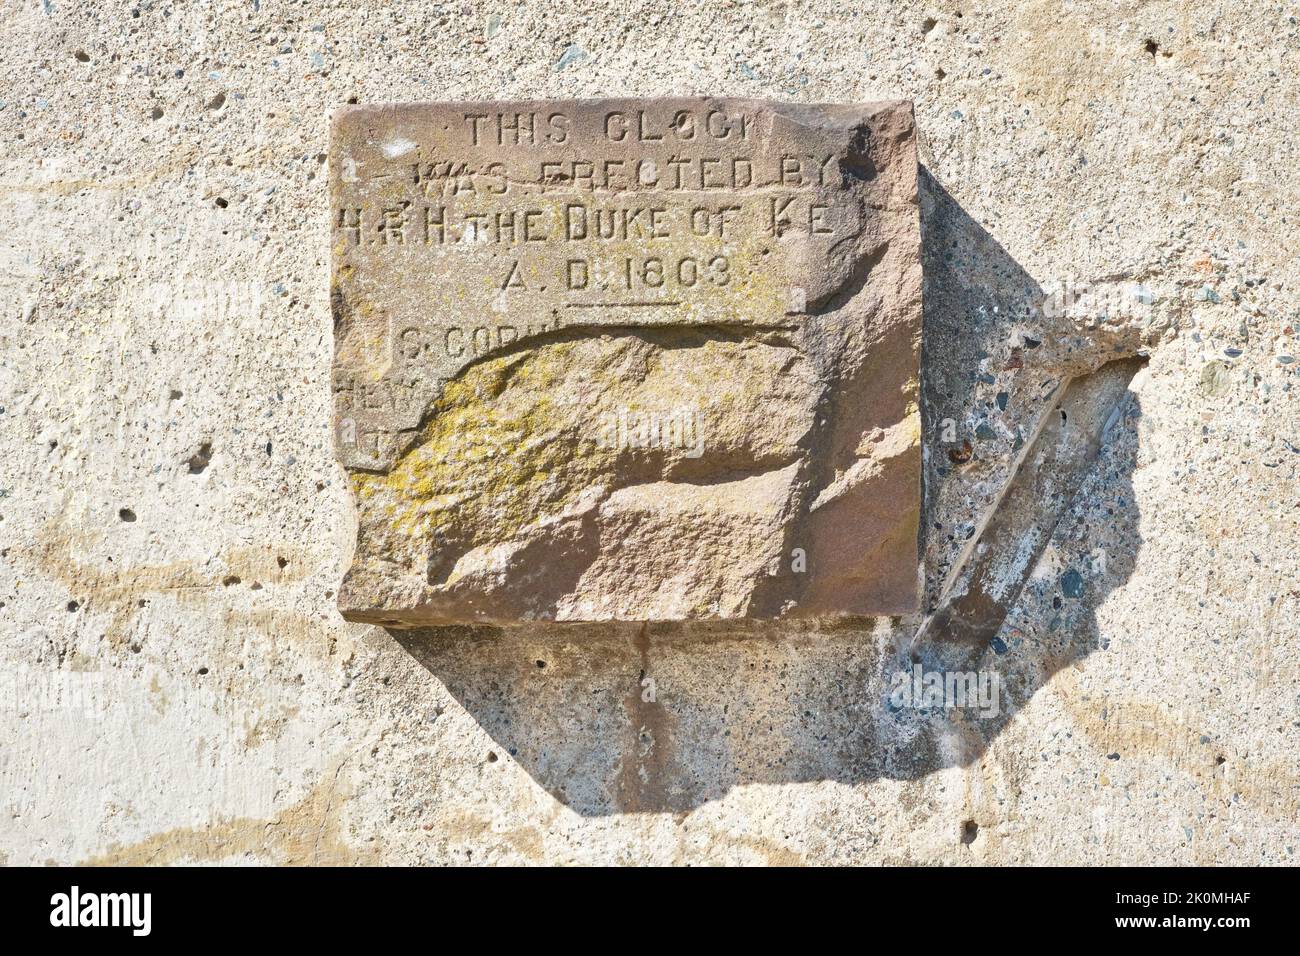 Very worn cornerstone commemorating the commission of a new Town Clock in 1803 by the Duke of Kent in Halifax Nova Scotia. Stock Photo